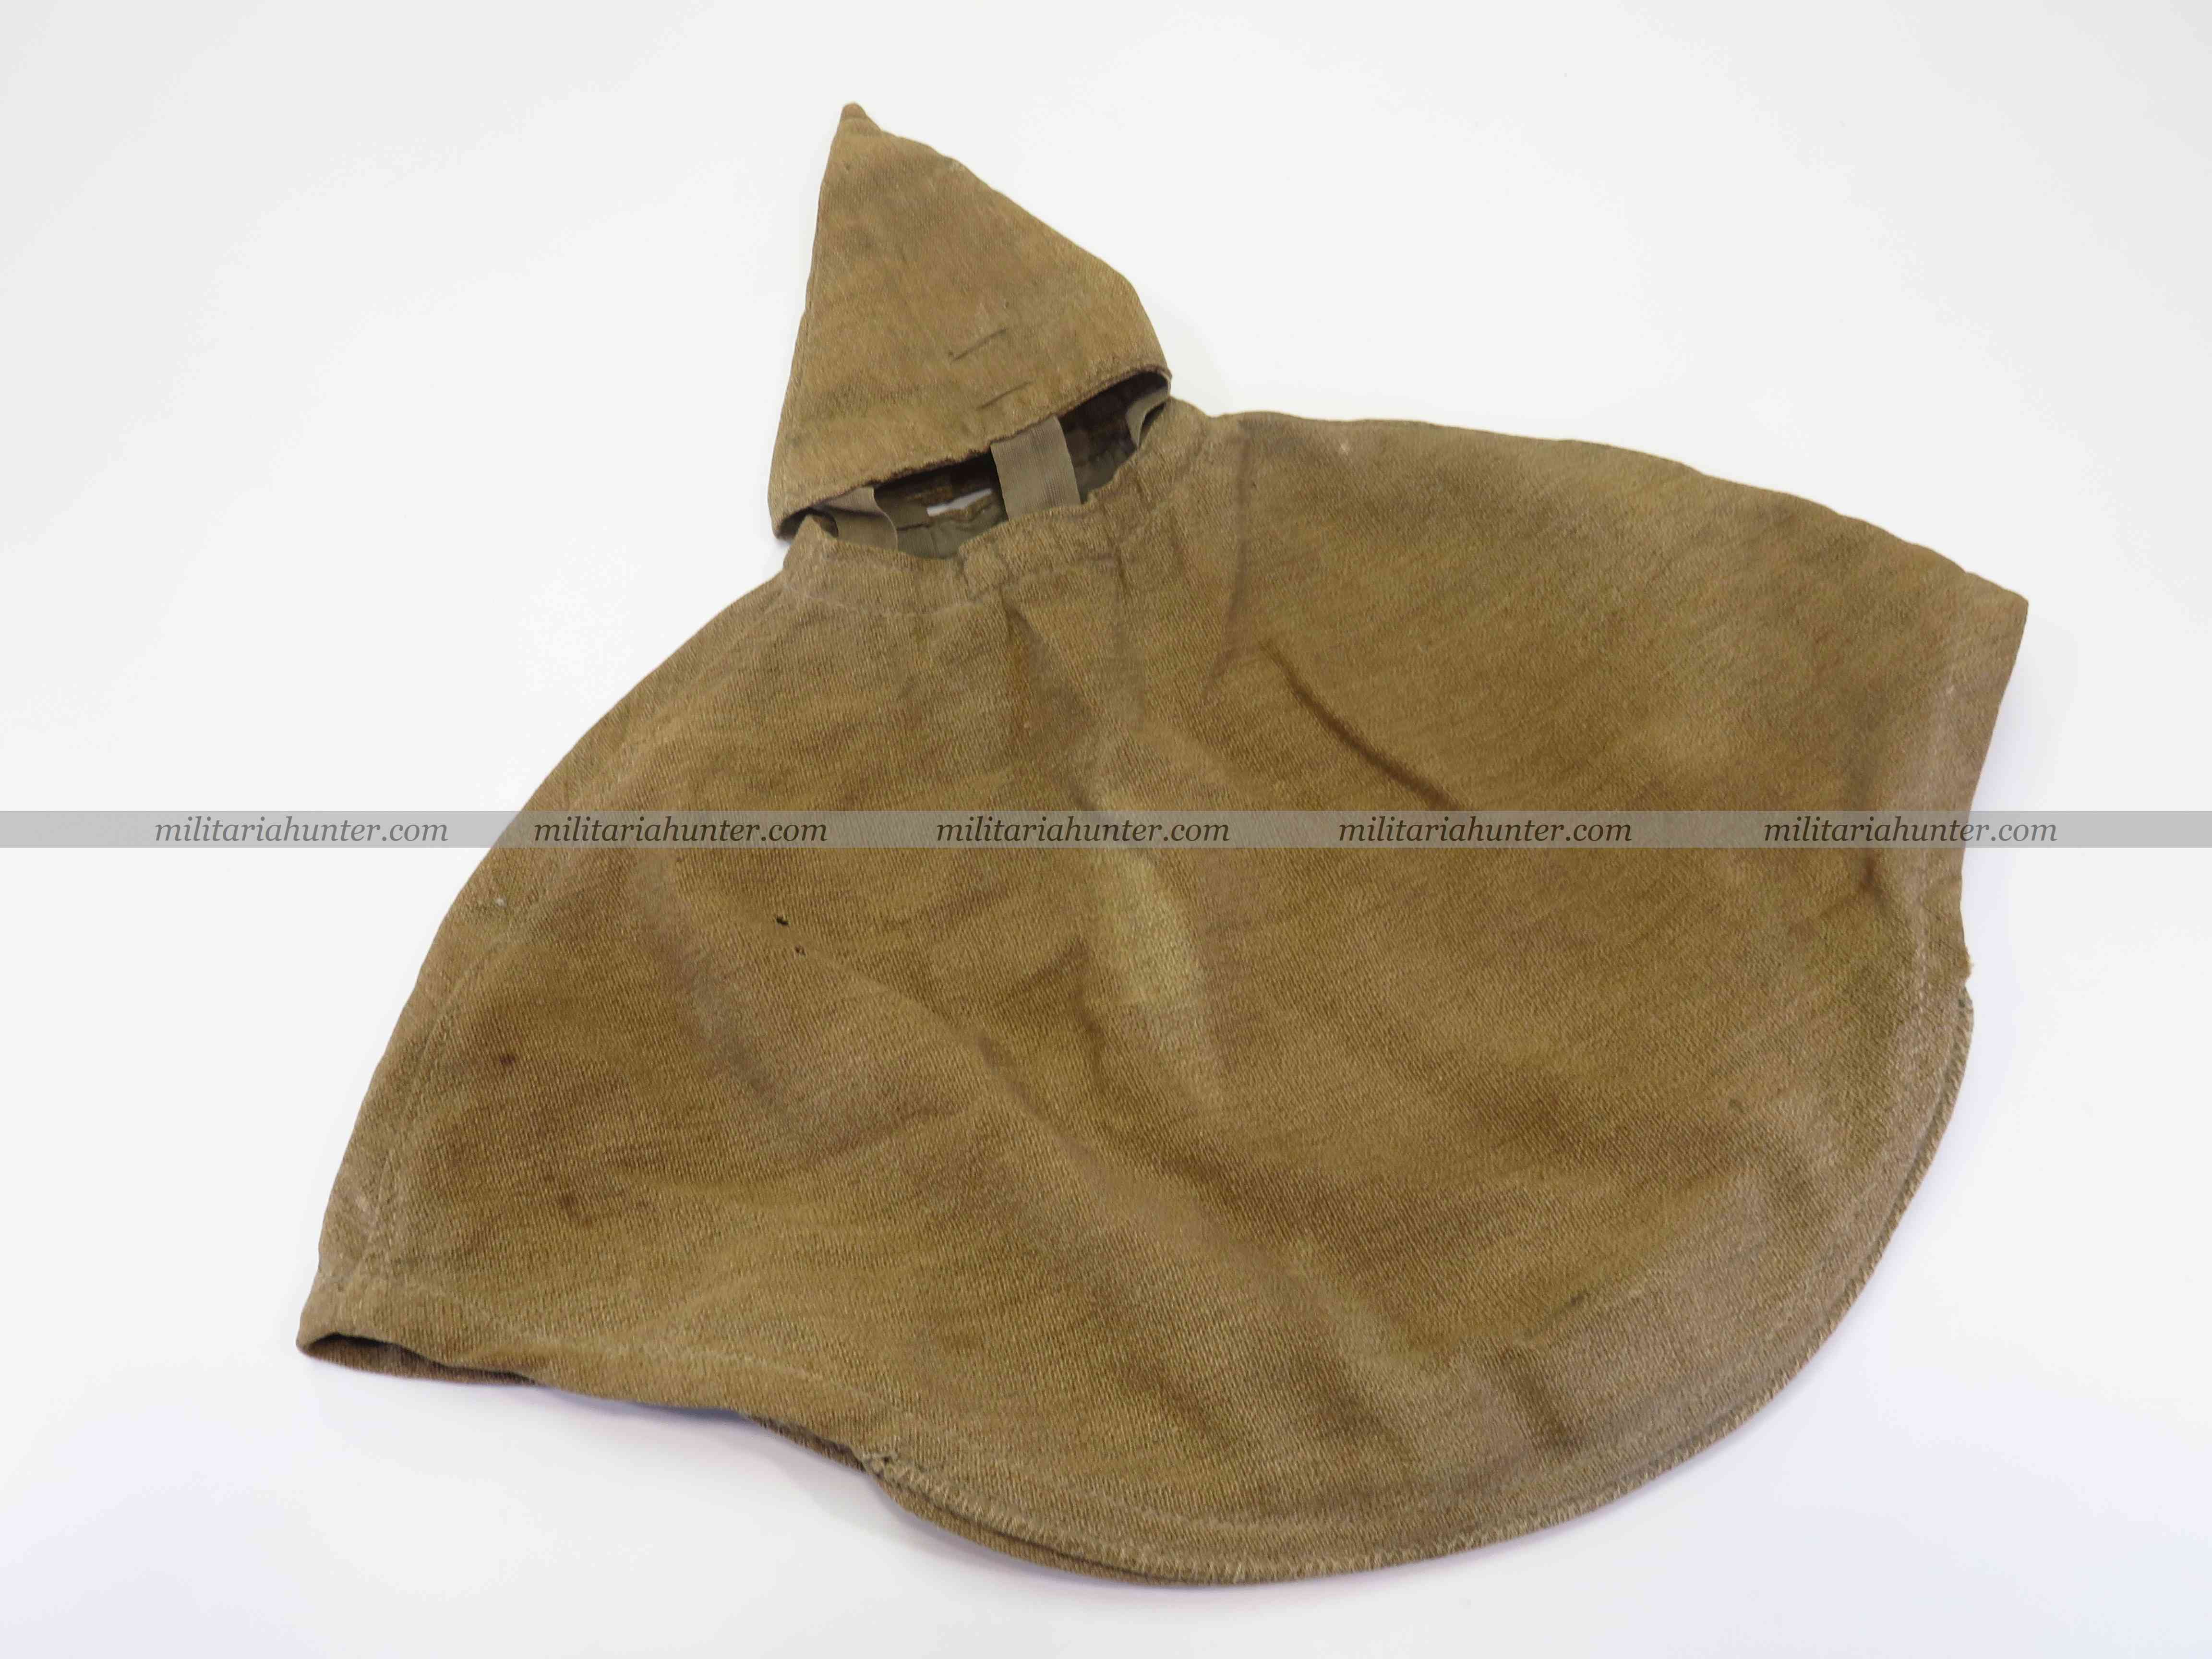 militaria : Couvre casque à pointe officier - officer spiked helmet cover - Pickelhaube Uber